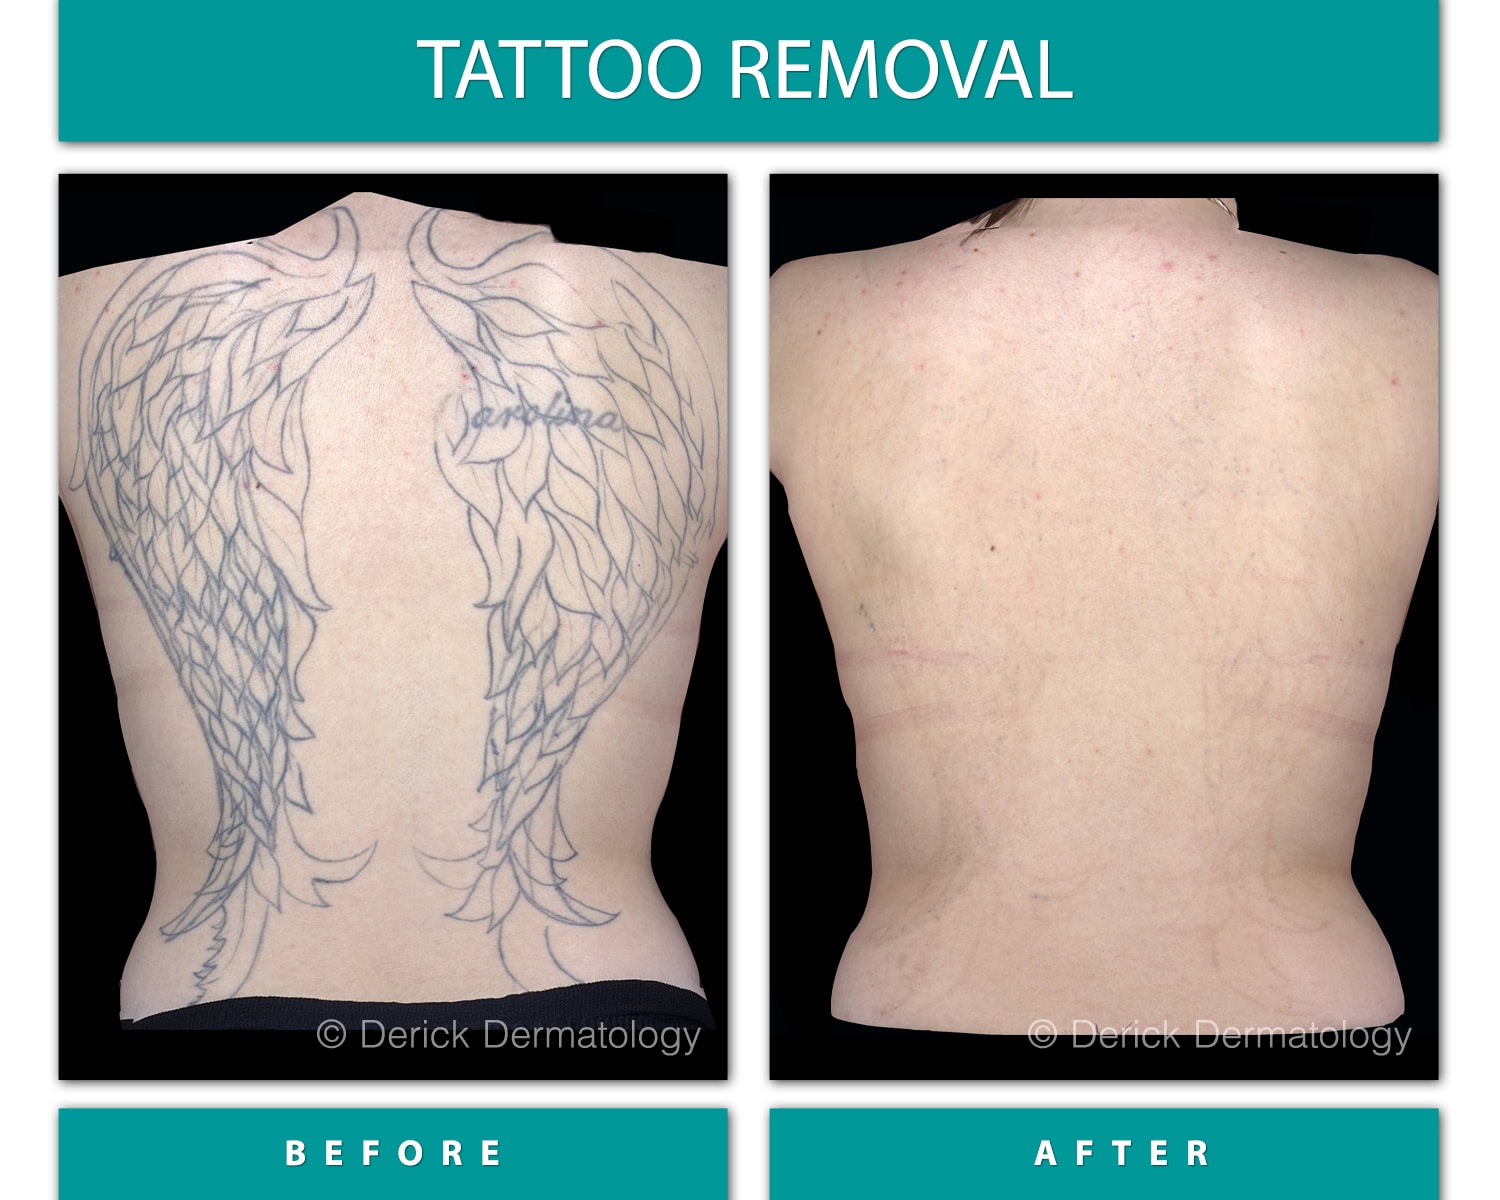 Before and After Image of Tattoo Removal